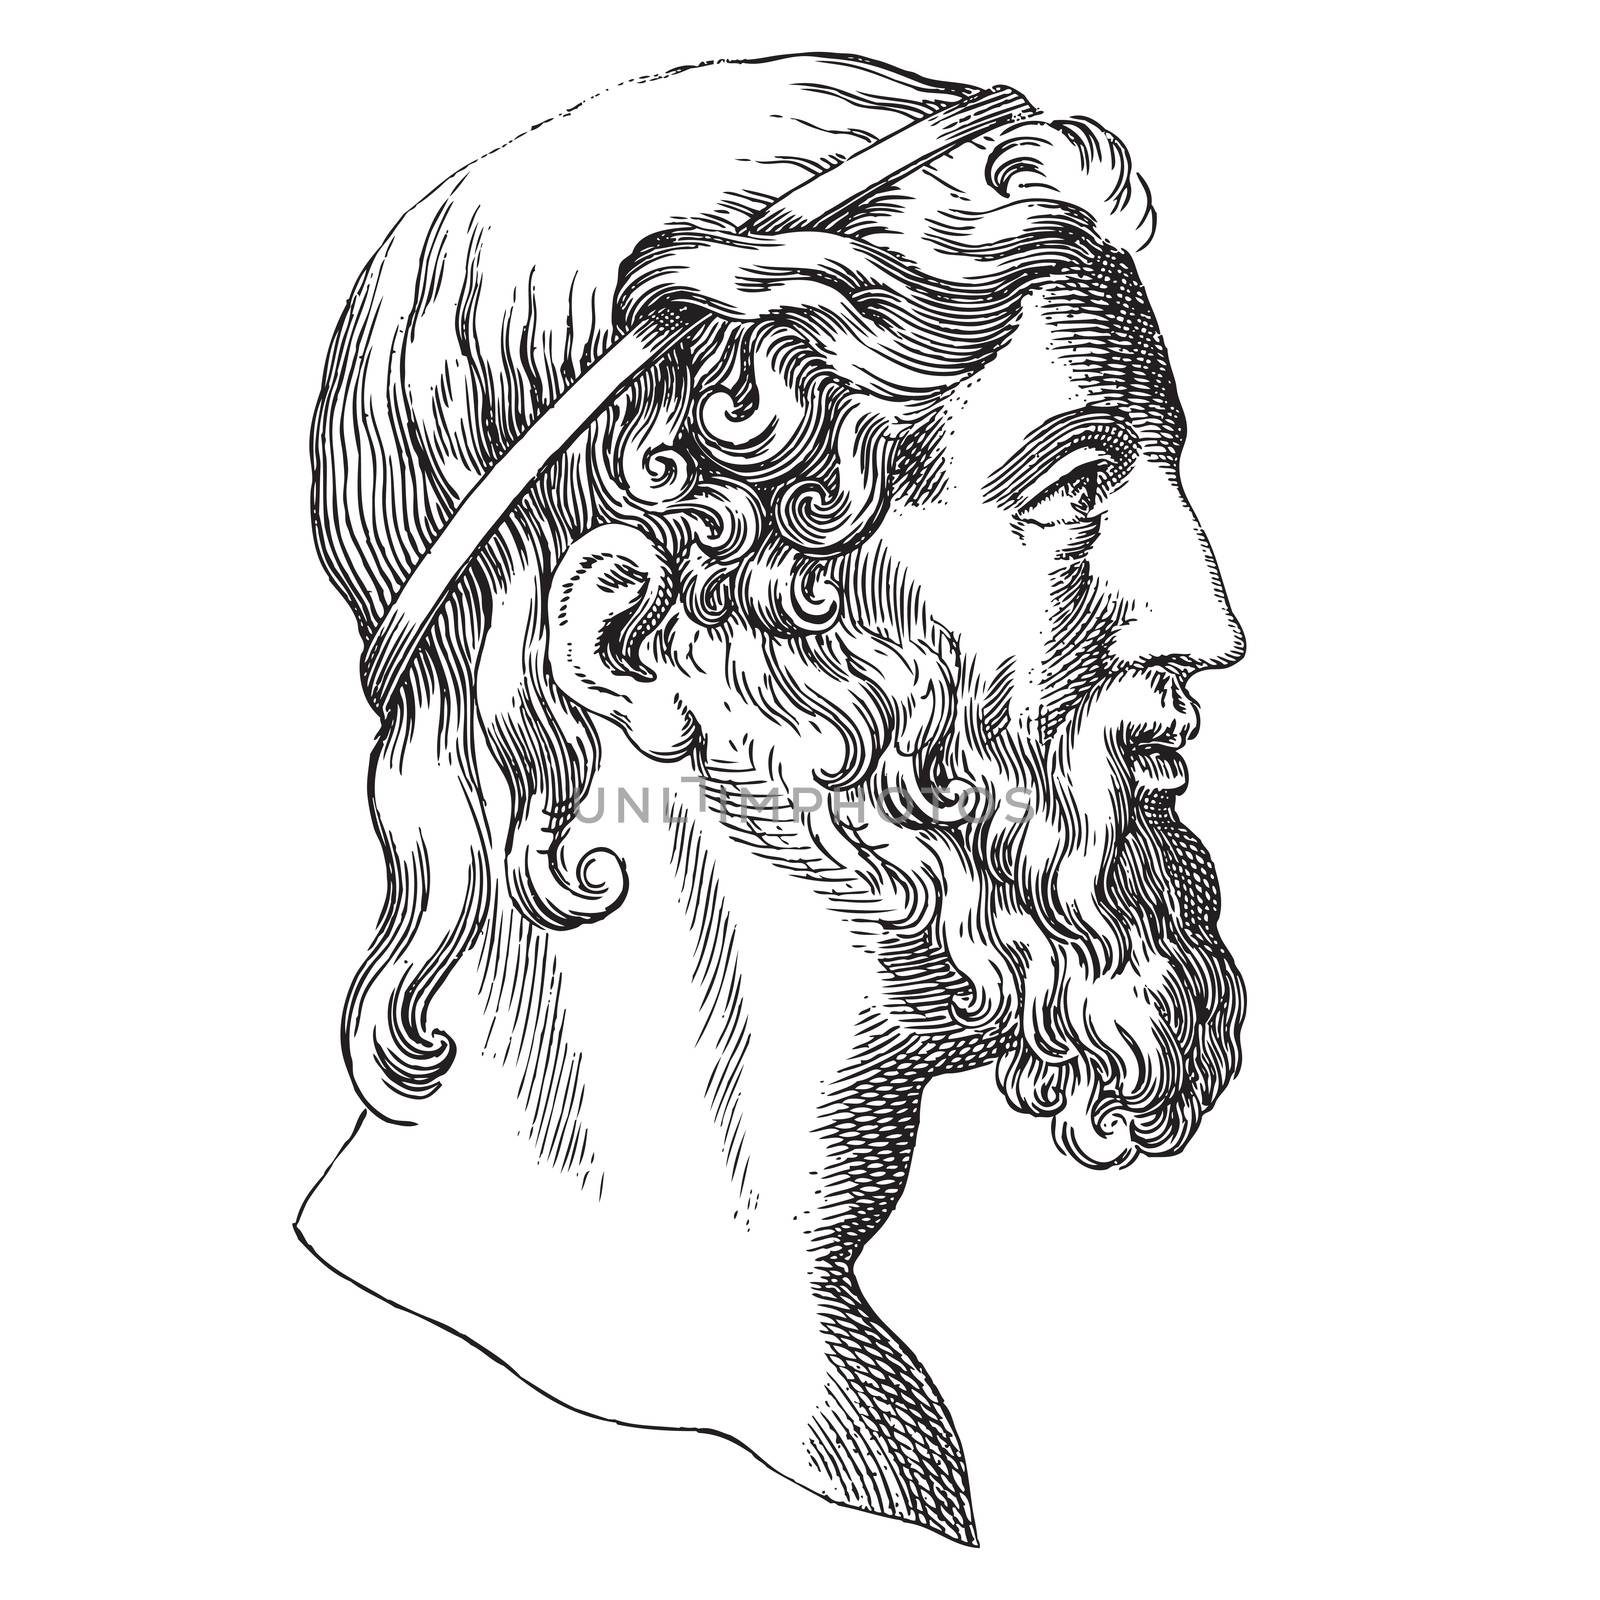 Ancient style engraving portrait of Aristotle, the famous ancient Greek phylosopher and mathematician